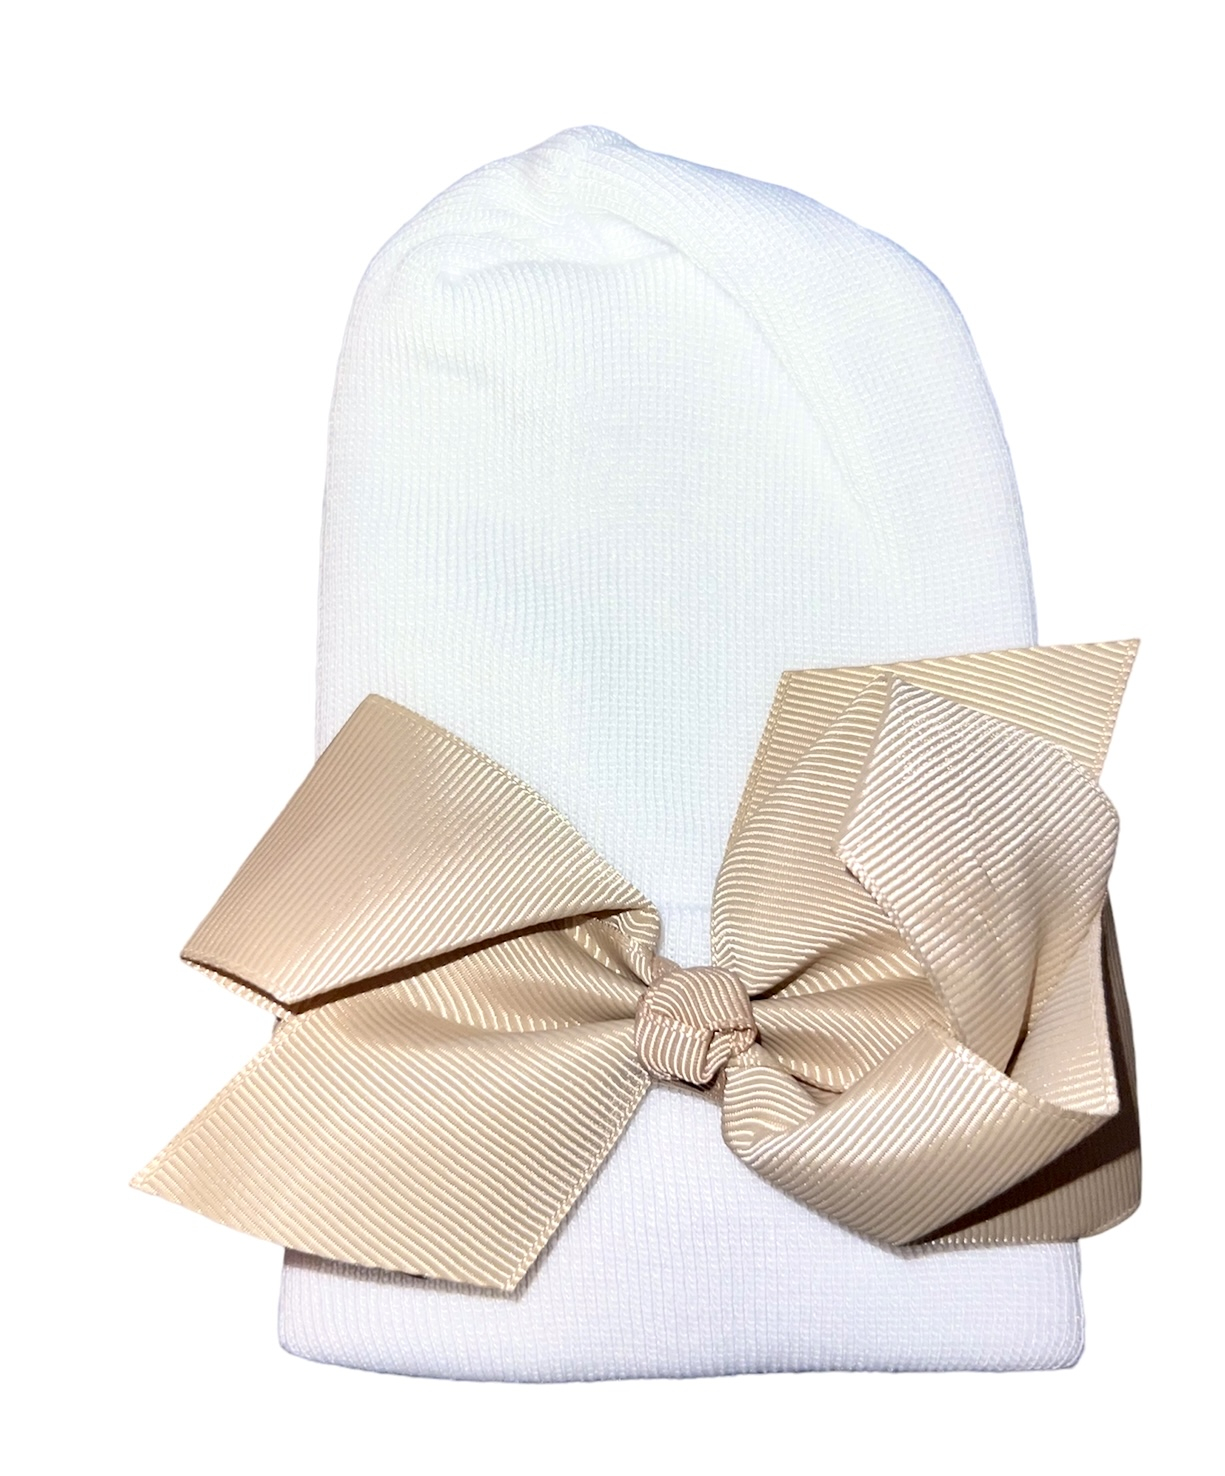 Newborn hat with ribbon bow golden extra warm